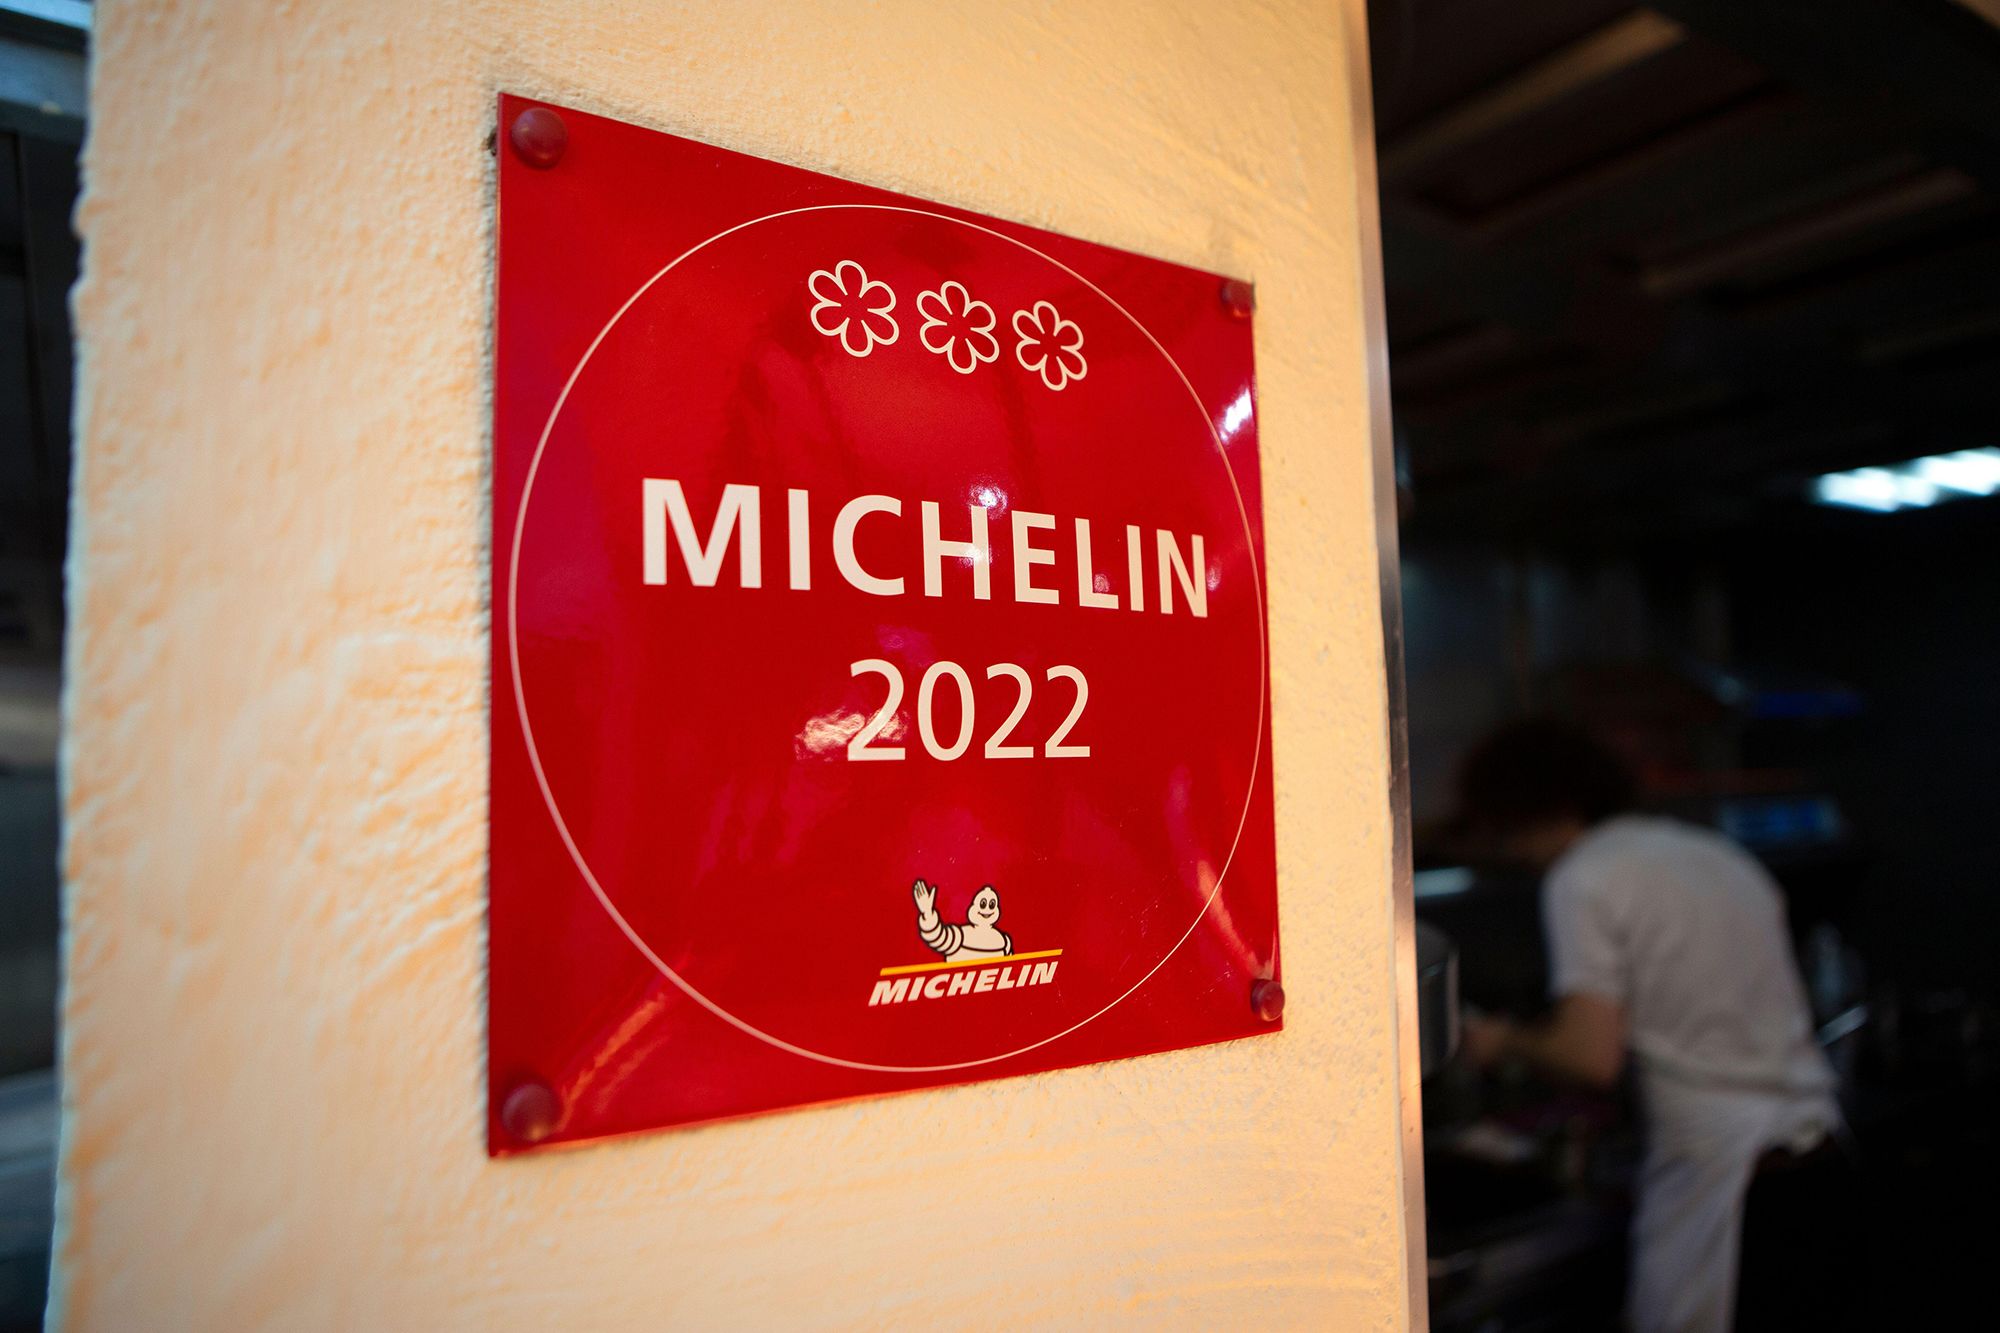 Michelin Guide history: How did a tire company become a restaurant